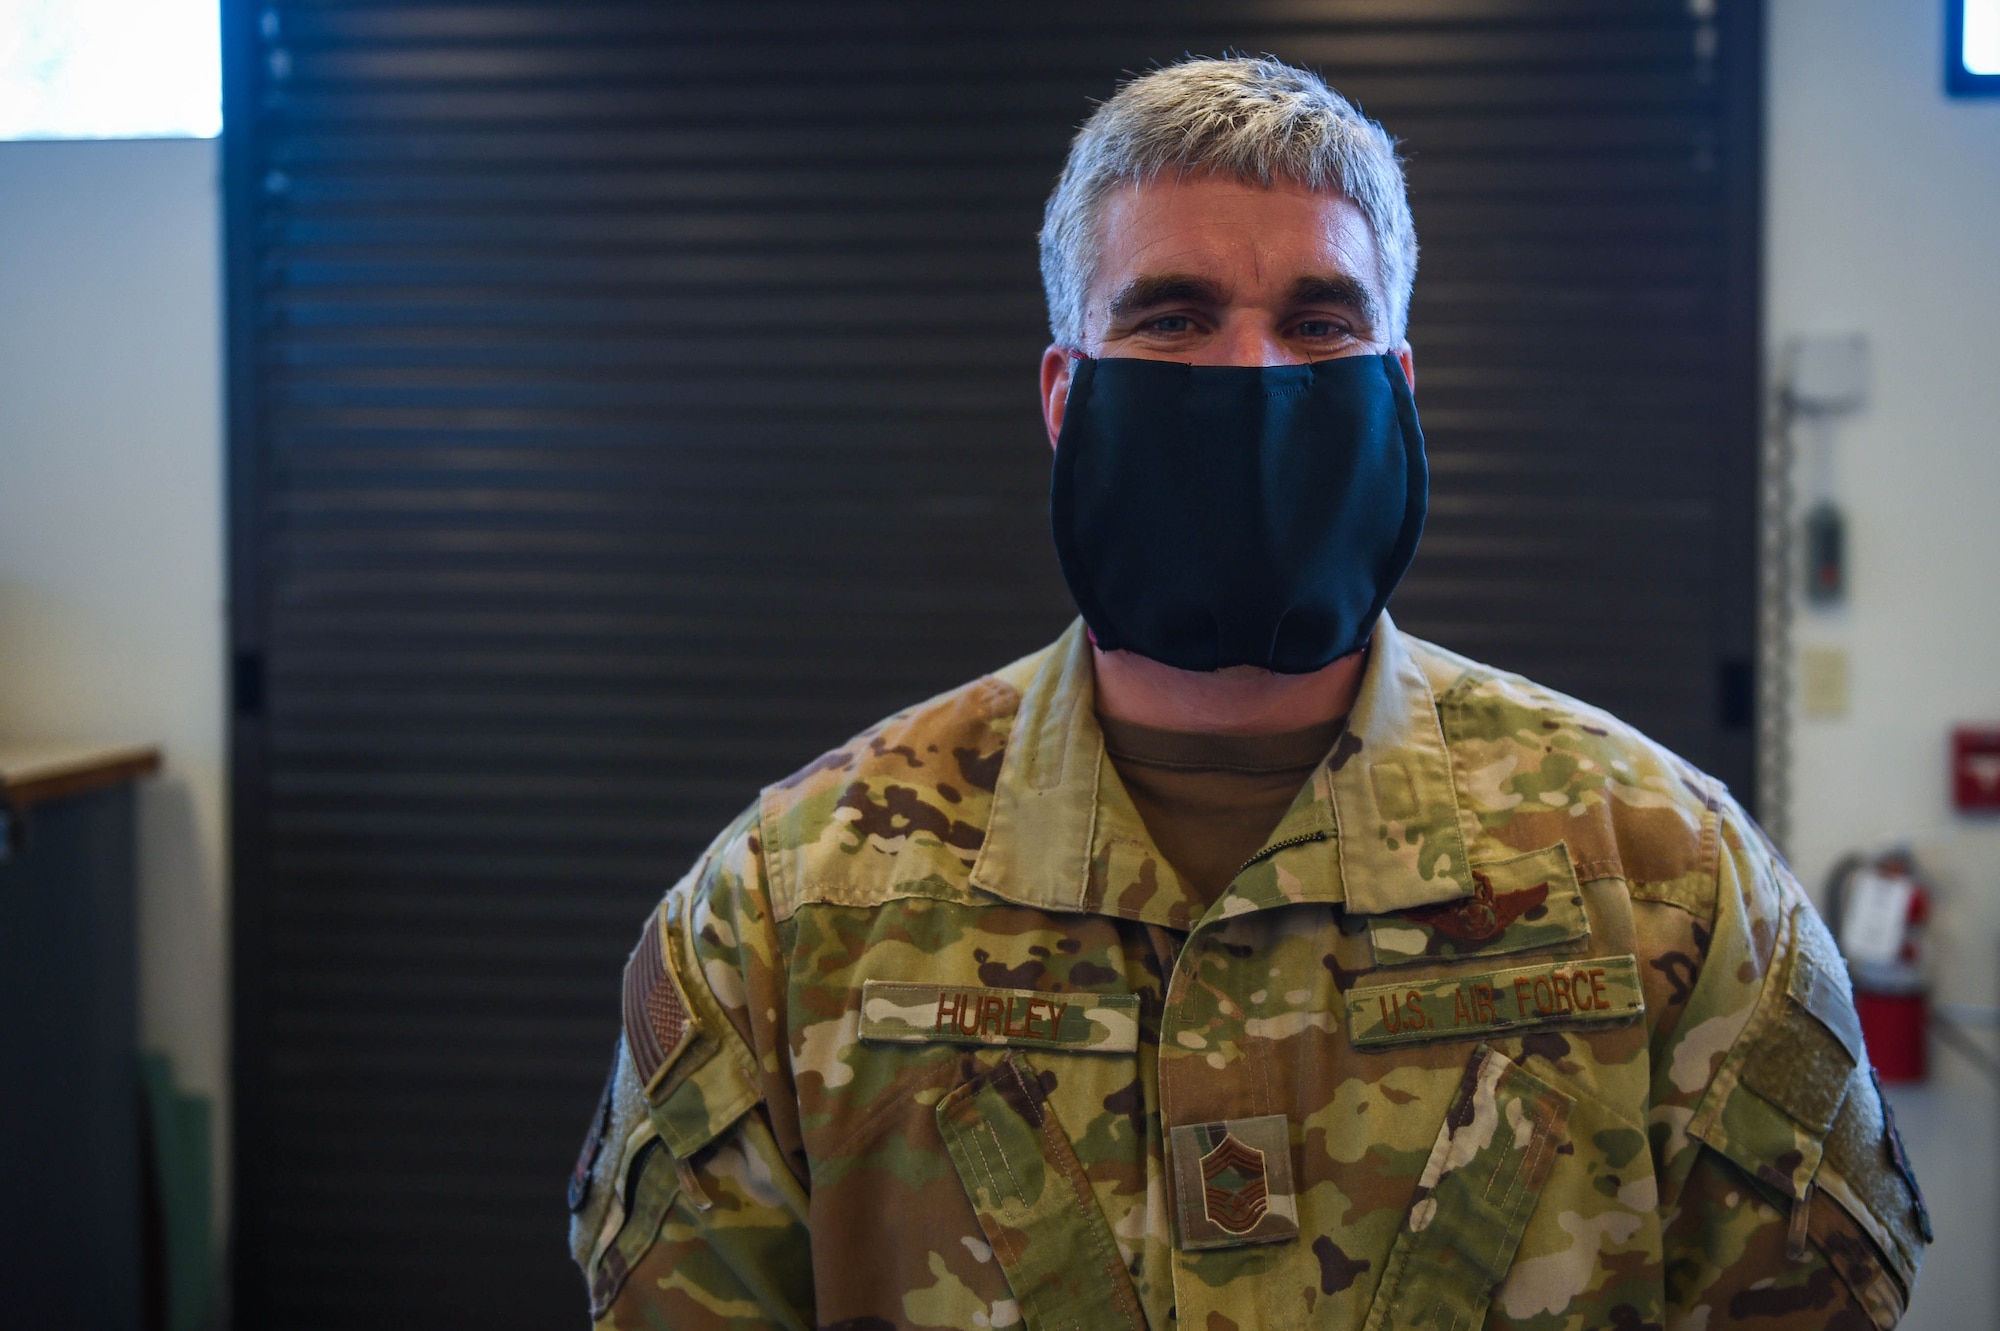 Chief Master Sgt. Skip Hurley, 62nd Operations Group chief enlisted manager, poses with a completed cloth face mask in the 62nd Operations Support squadron aircrew flight equipment fabrication shop on Joint Base Lewis-McChord, Wash., April 6, 2020. Mask production is not what the 62nd OSS AFE fabrication shop normally produces, but the unit innovatively adjusted to the mission requirements due to the COVID-19 outbreak. (U.S. Air Force photo by Airman 1st Class Mikayla Heineck)